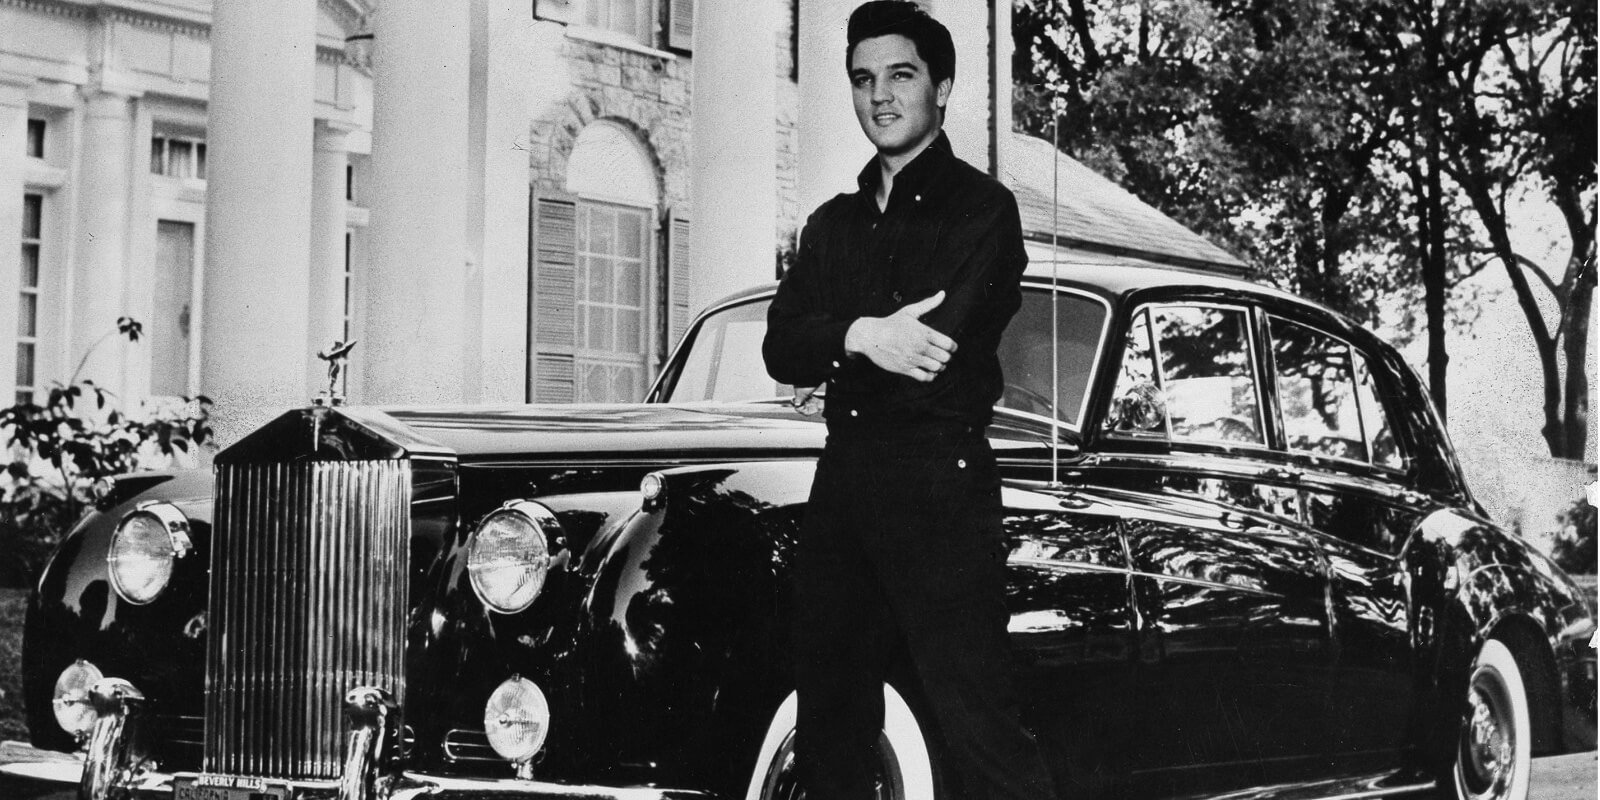 Elvis Presley poses in front of his Graceland home in Memphis, TN.